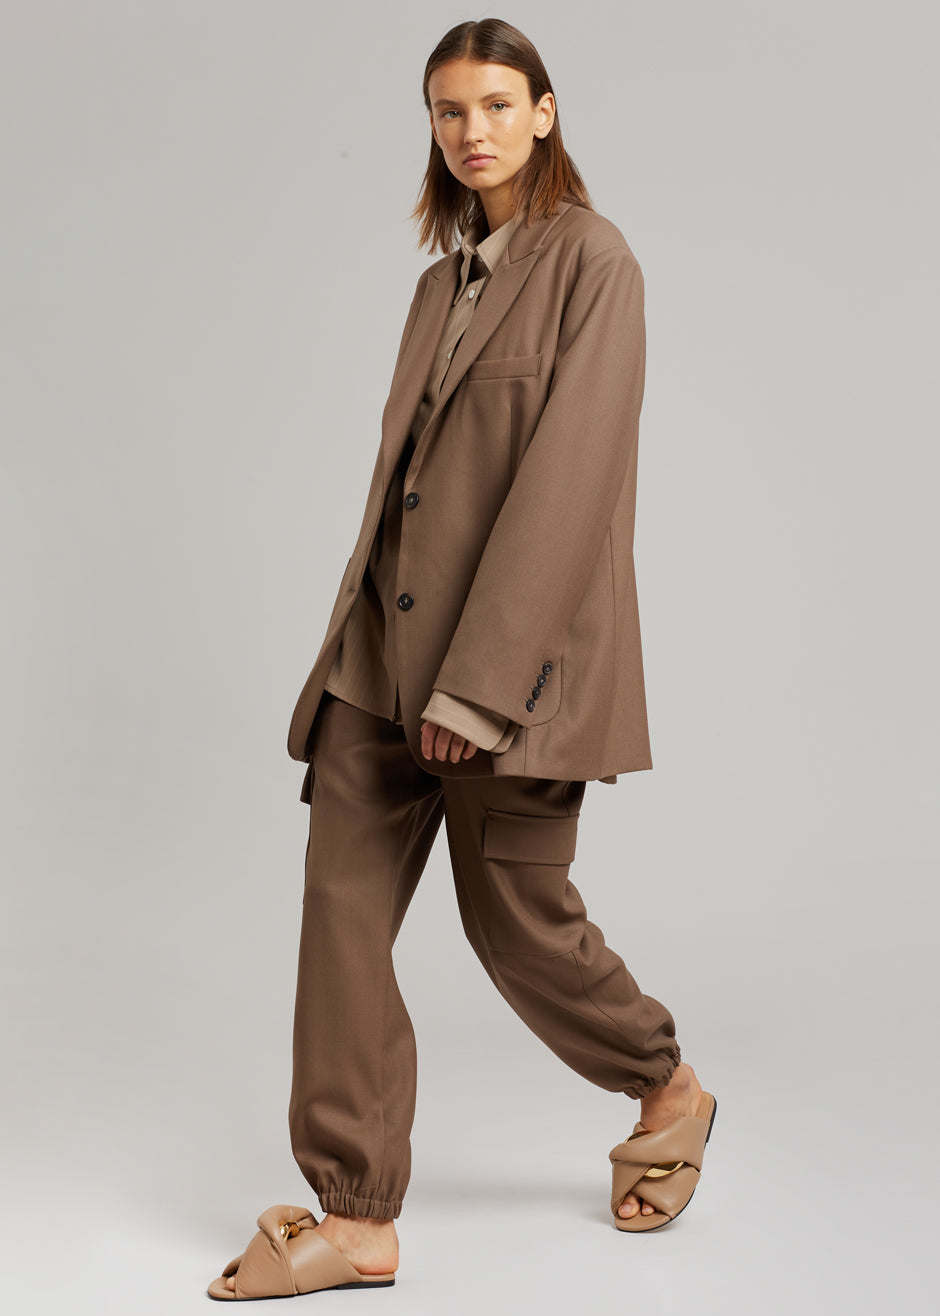 JW Andersons Uniqlo Collaboration Is All About Wearability  Vogue